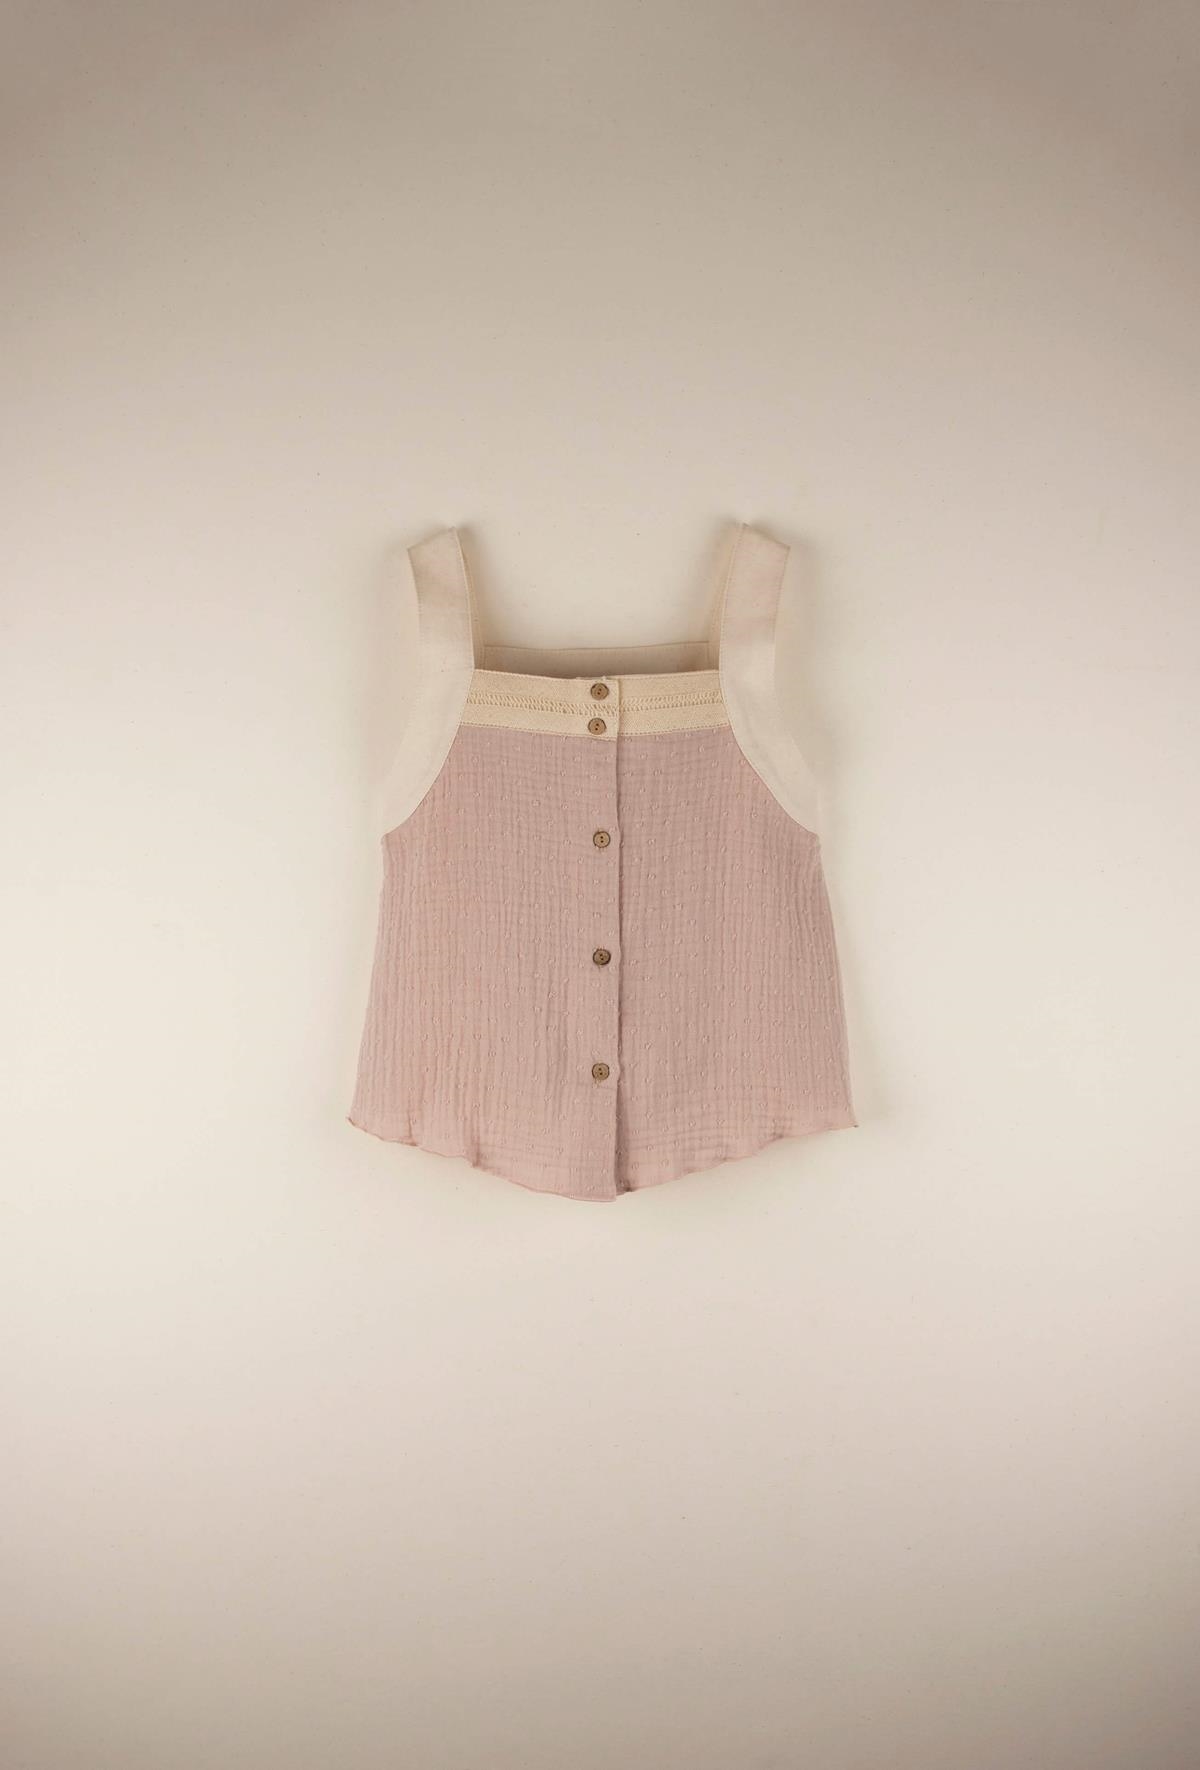 Mod.19.2 Pink organic blouse with straps | SS22 Mod.19.2 Pink organic blouse with straps | 1